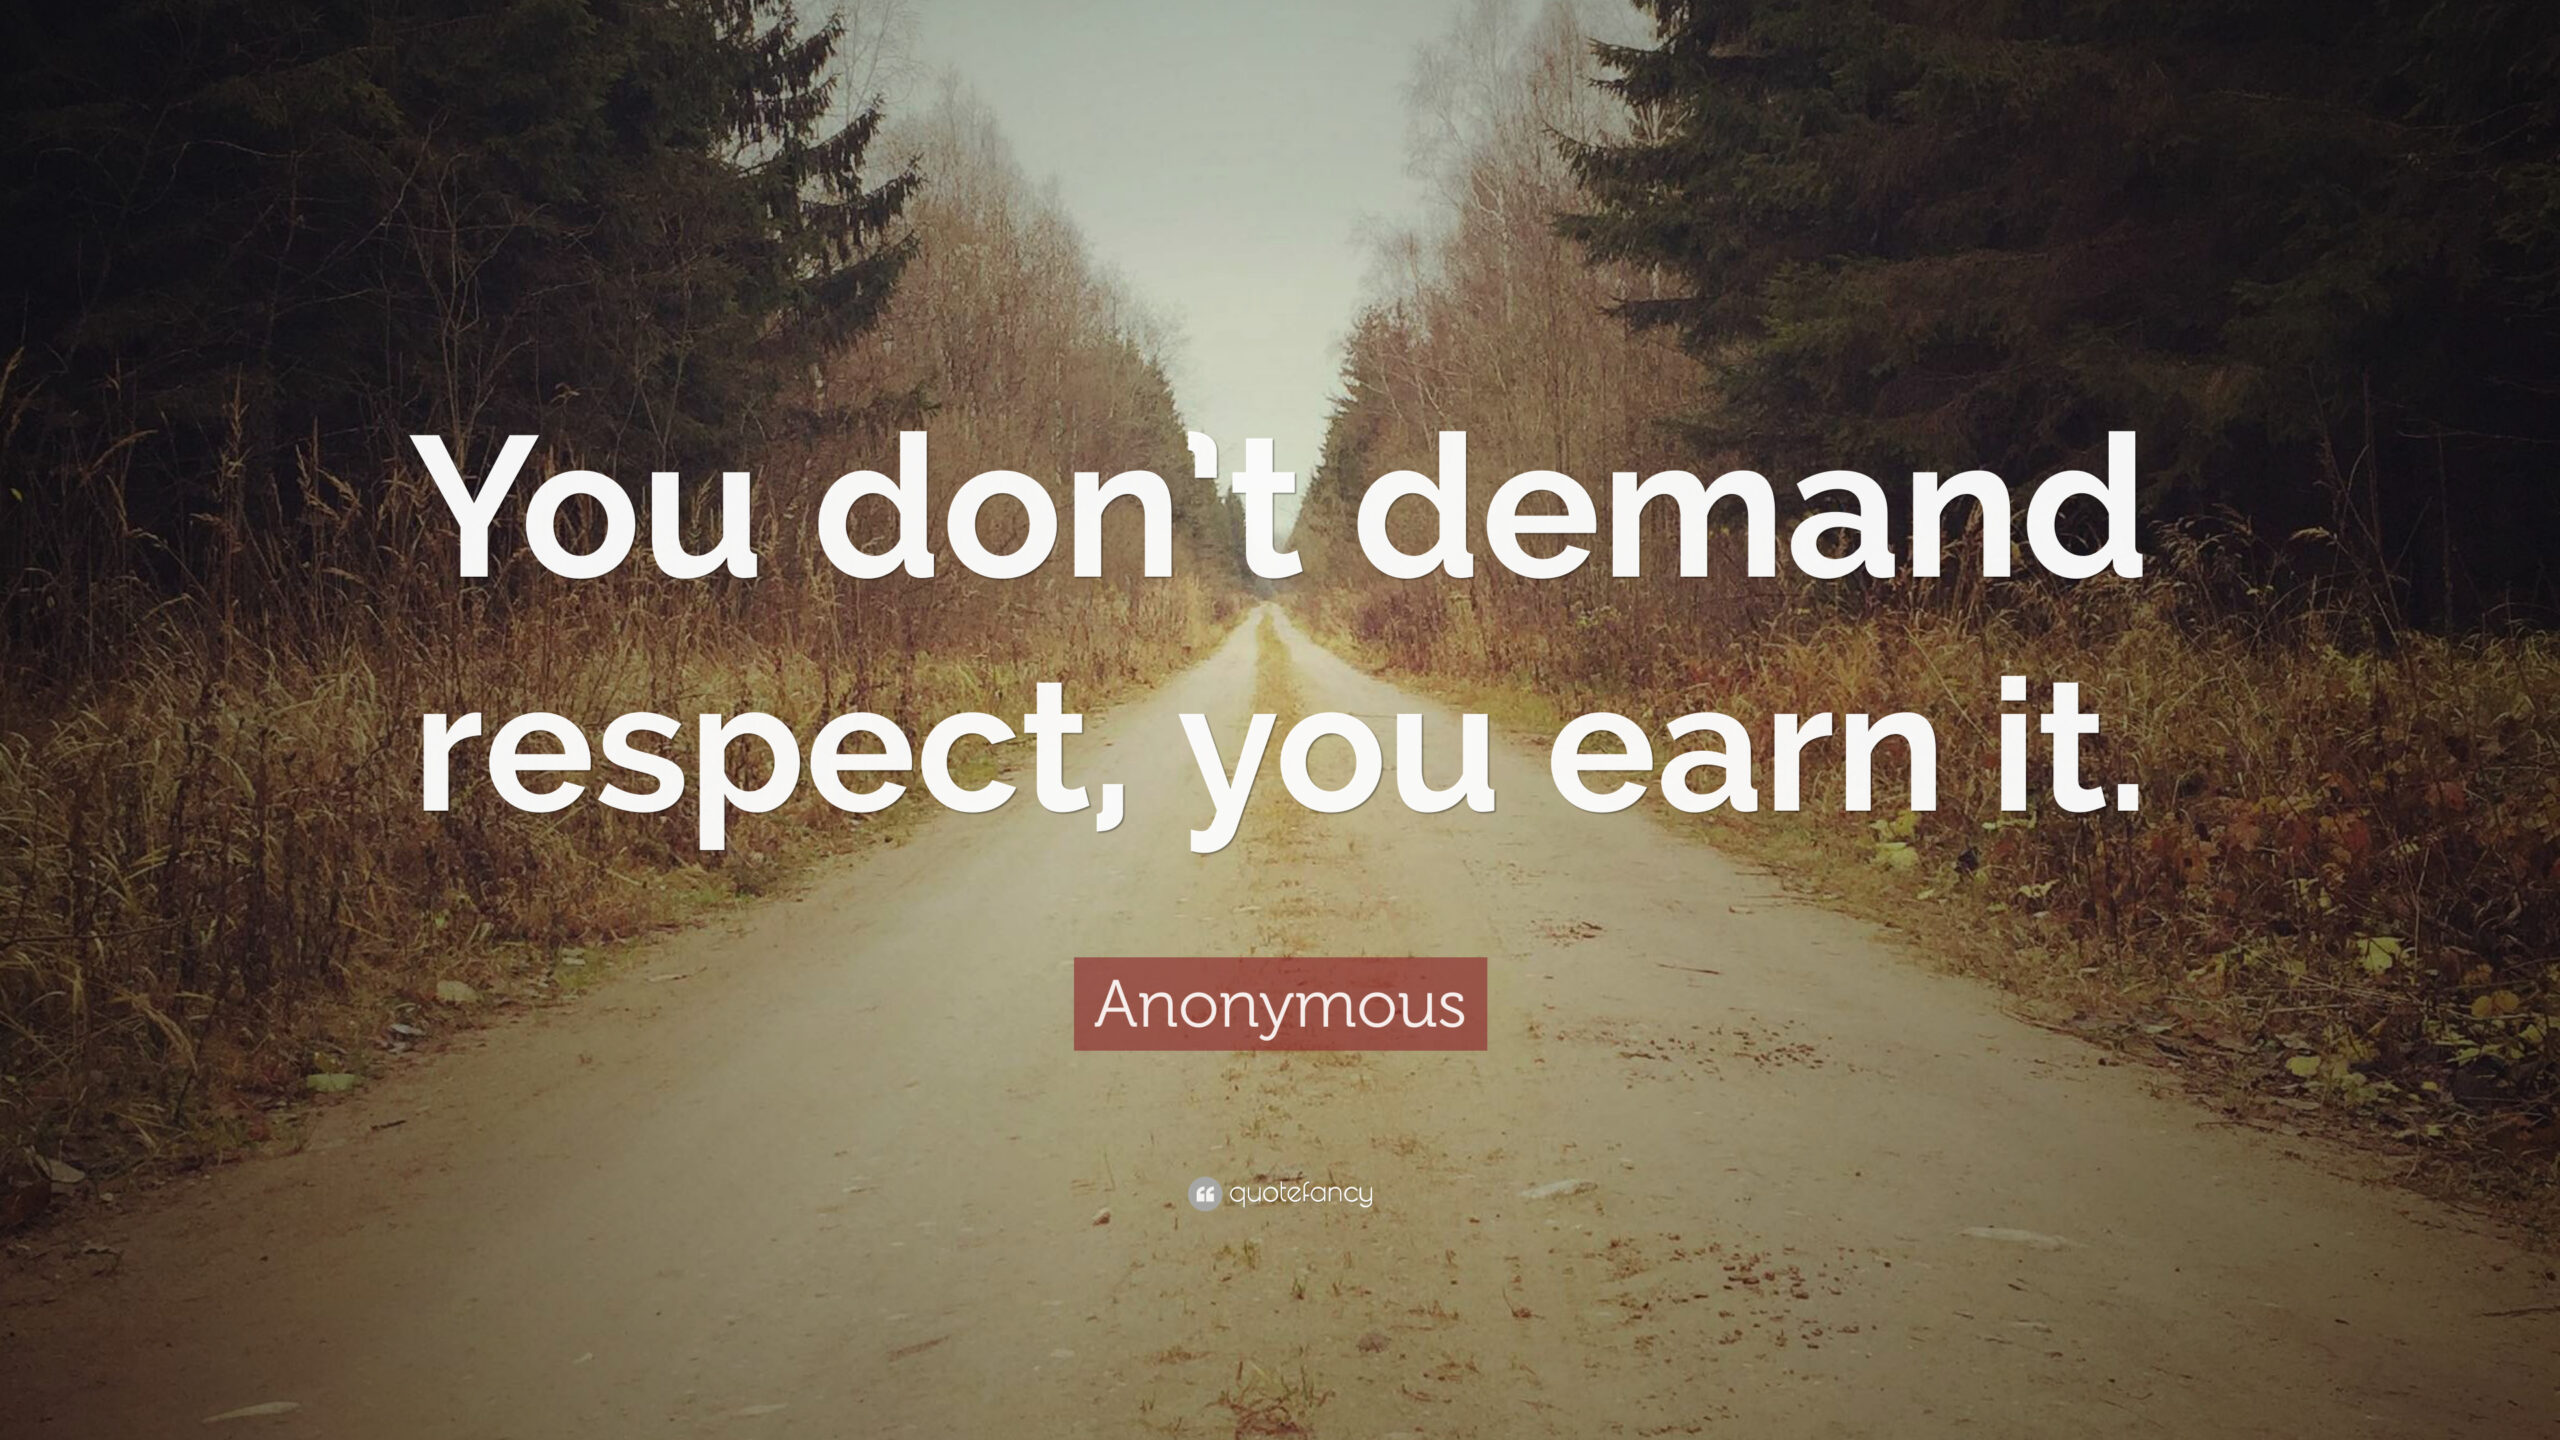 Is Respect on demand now?